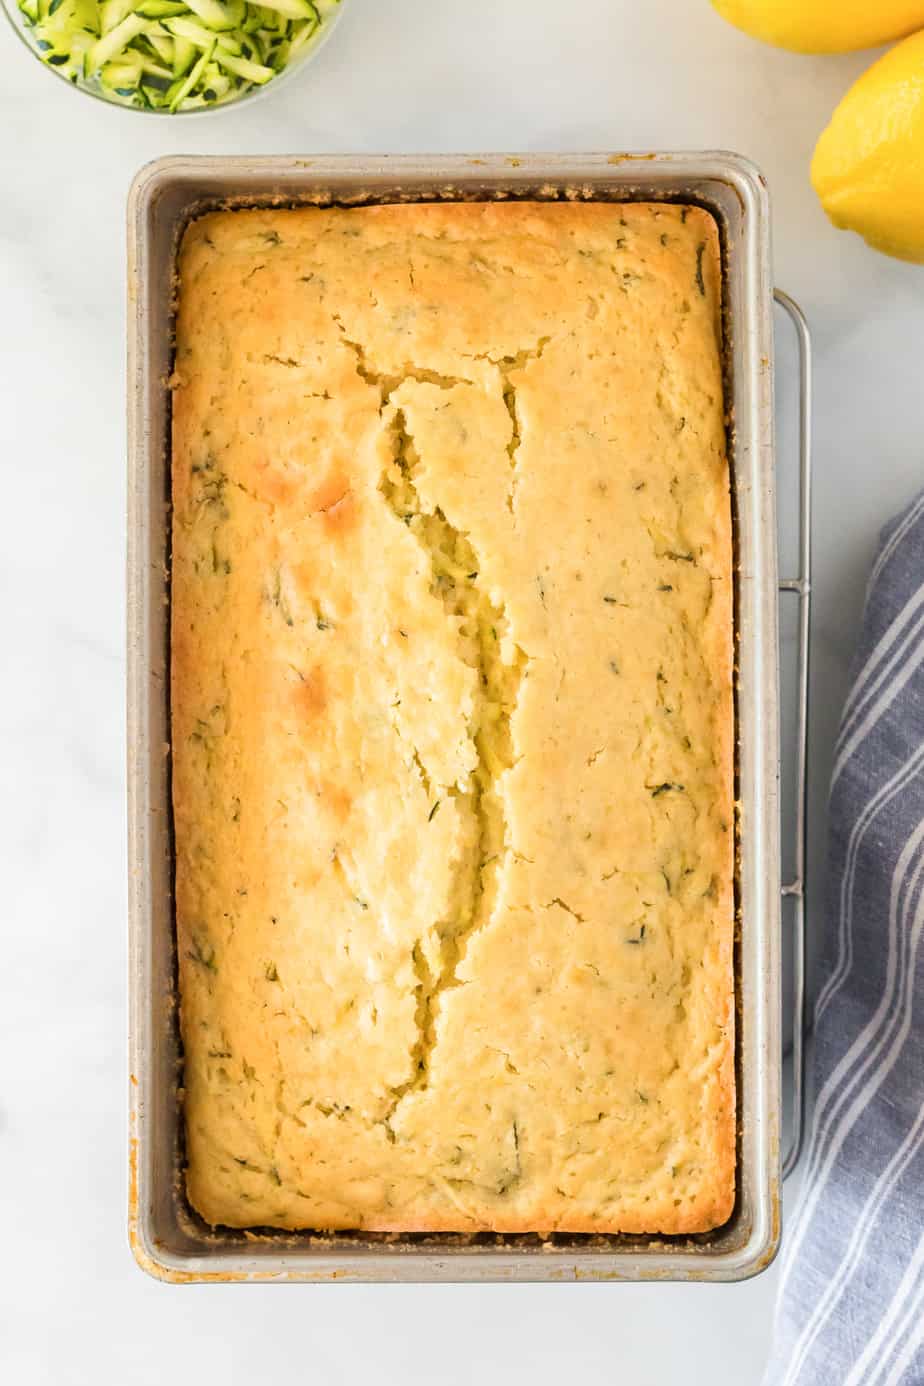 Baked lemon zucchini cake in pan from above